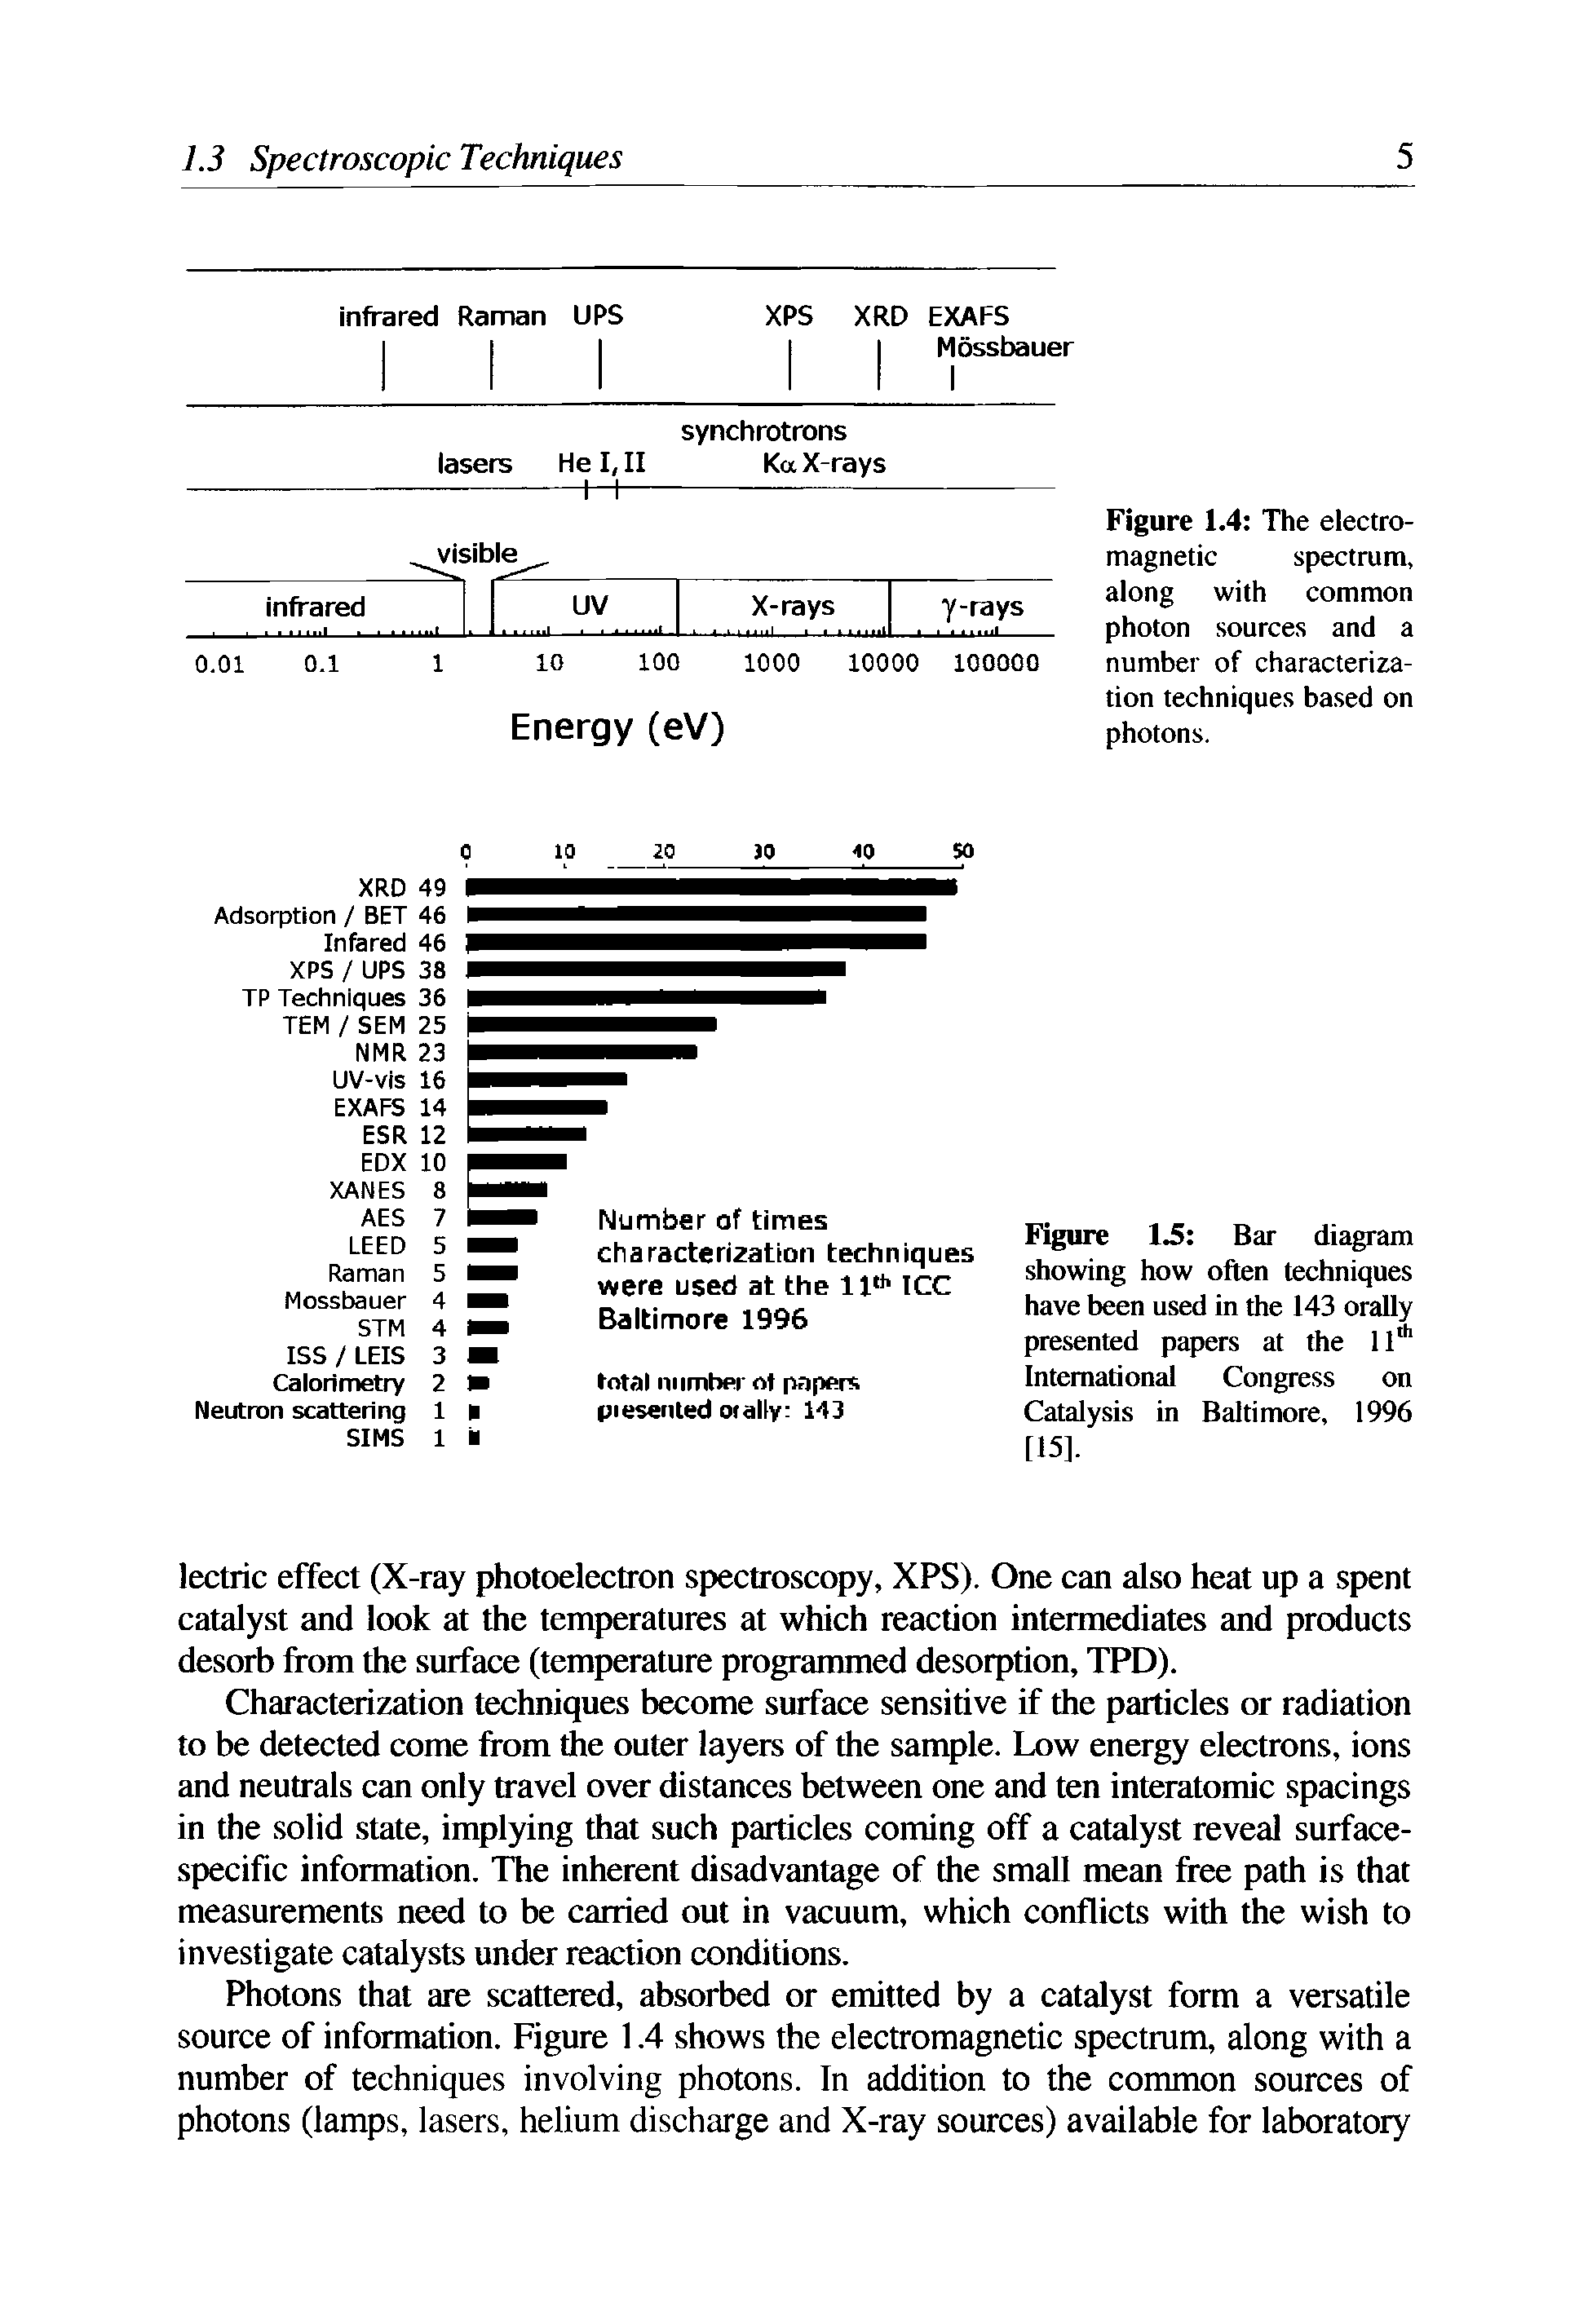 Figure 1.5 Bar diagram showing how often techniques have been used in the 143 orally presented papers at the llIh International Congress on Catalysis in Baltimore, 1996 [15].